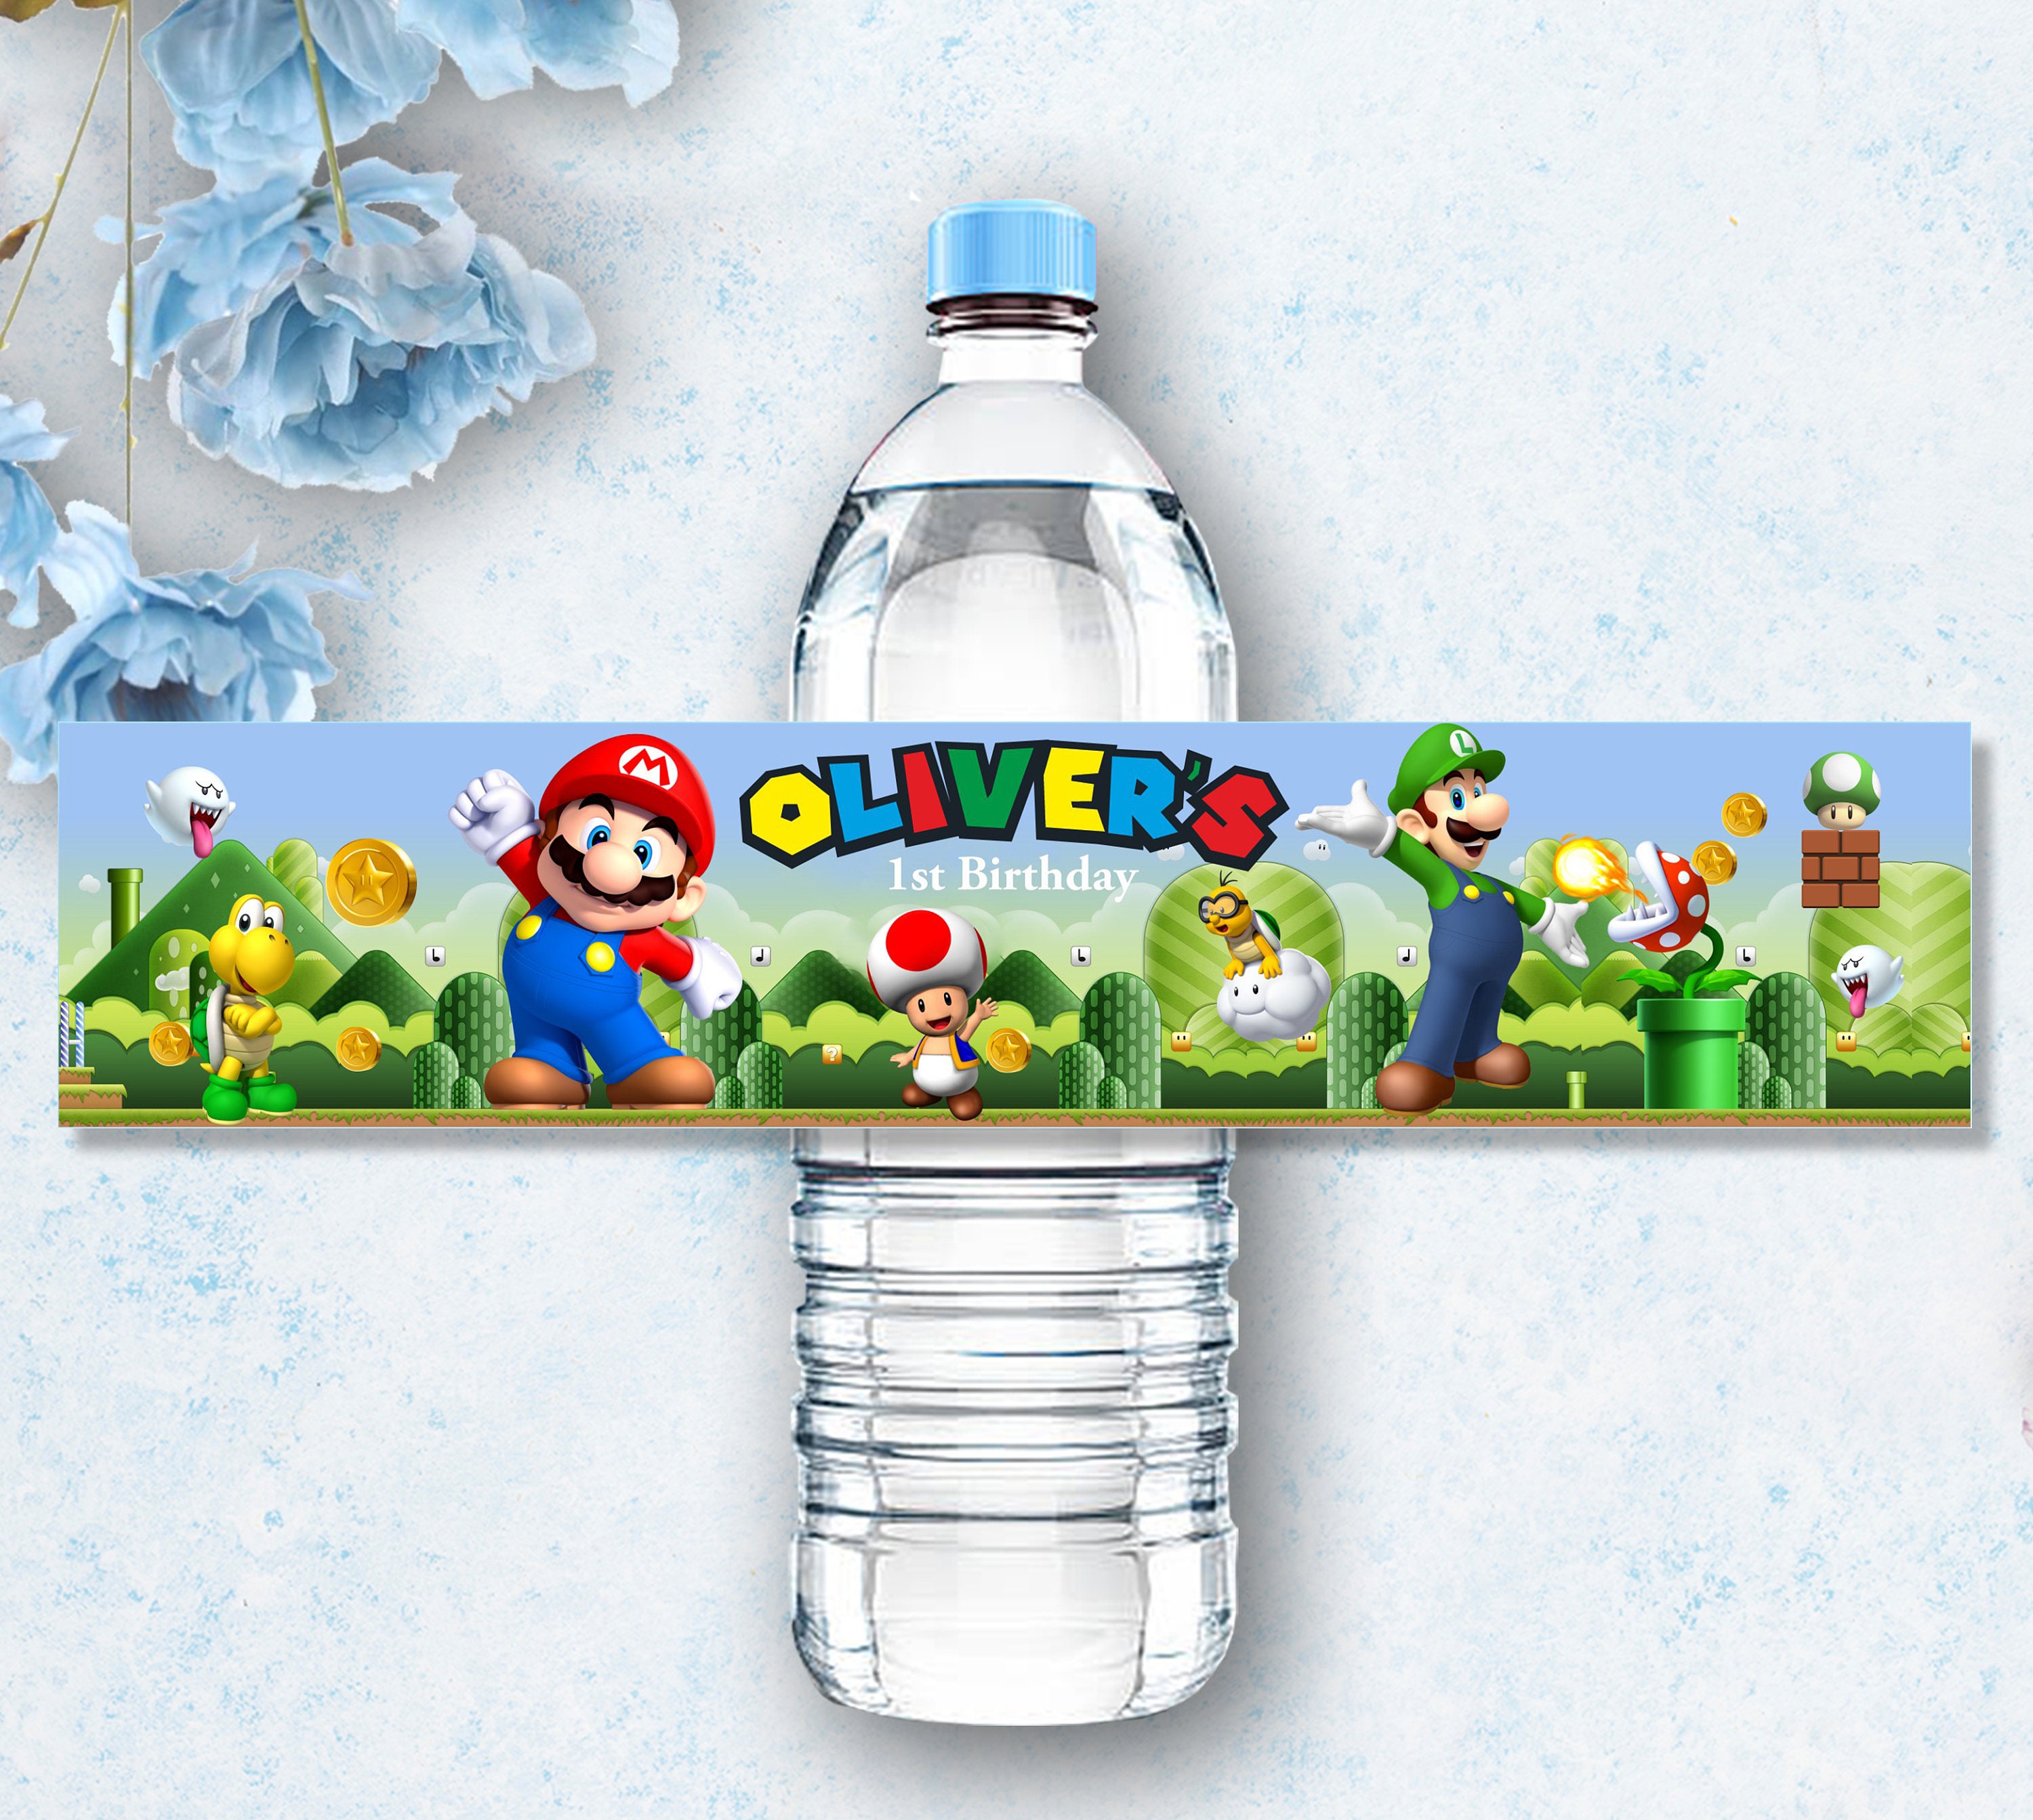 Super Mario: Stainless Water Bottle - 430ml (With Cup Ver.)